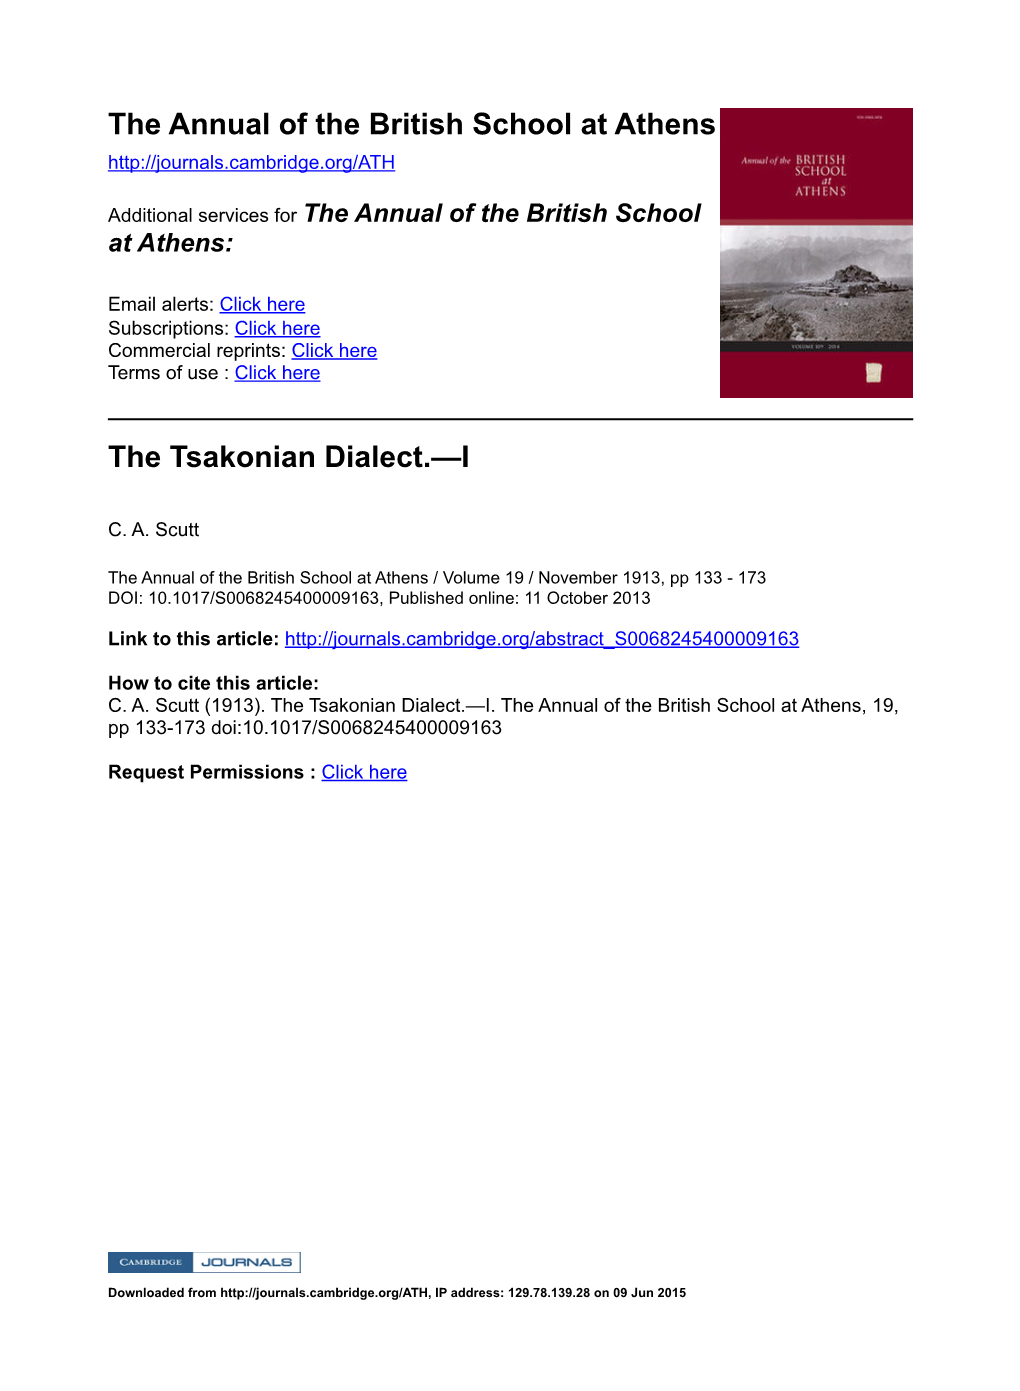 The Annual of the British School at Athens the Tsakonian Dialect.—I